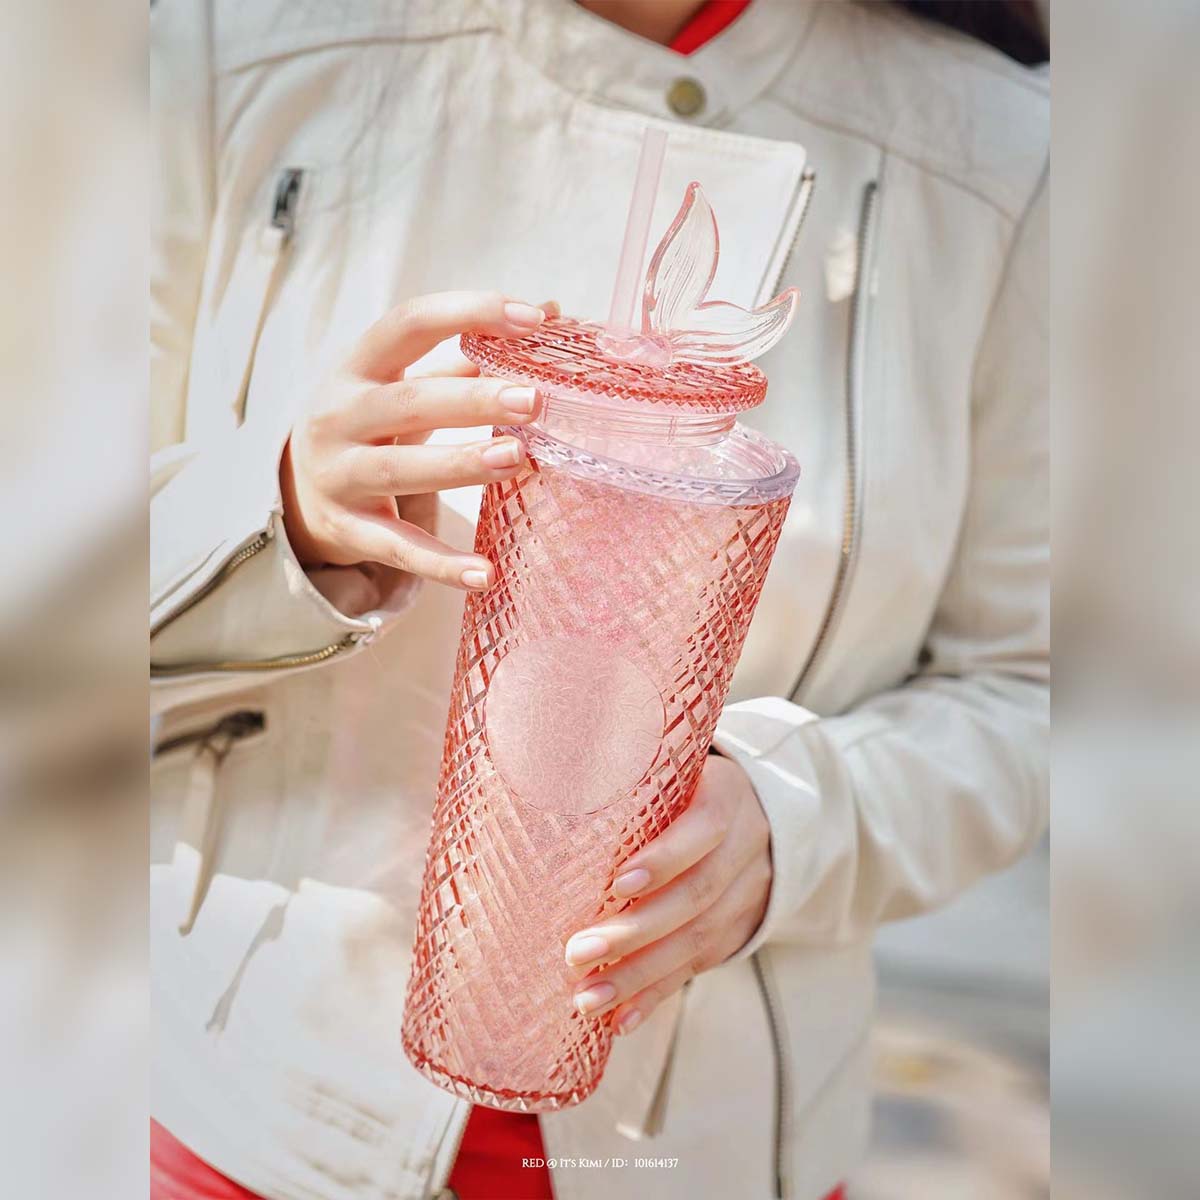 🎁 Starbucks HOLIDAY 2022 WOODLAND Light-Pink LACE Soft-Touch Tumbler 24oz